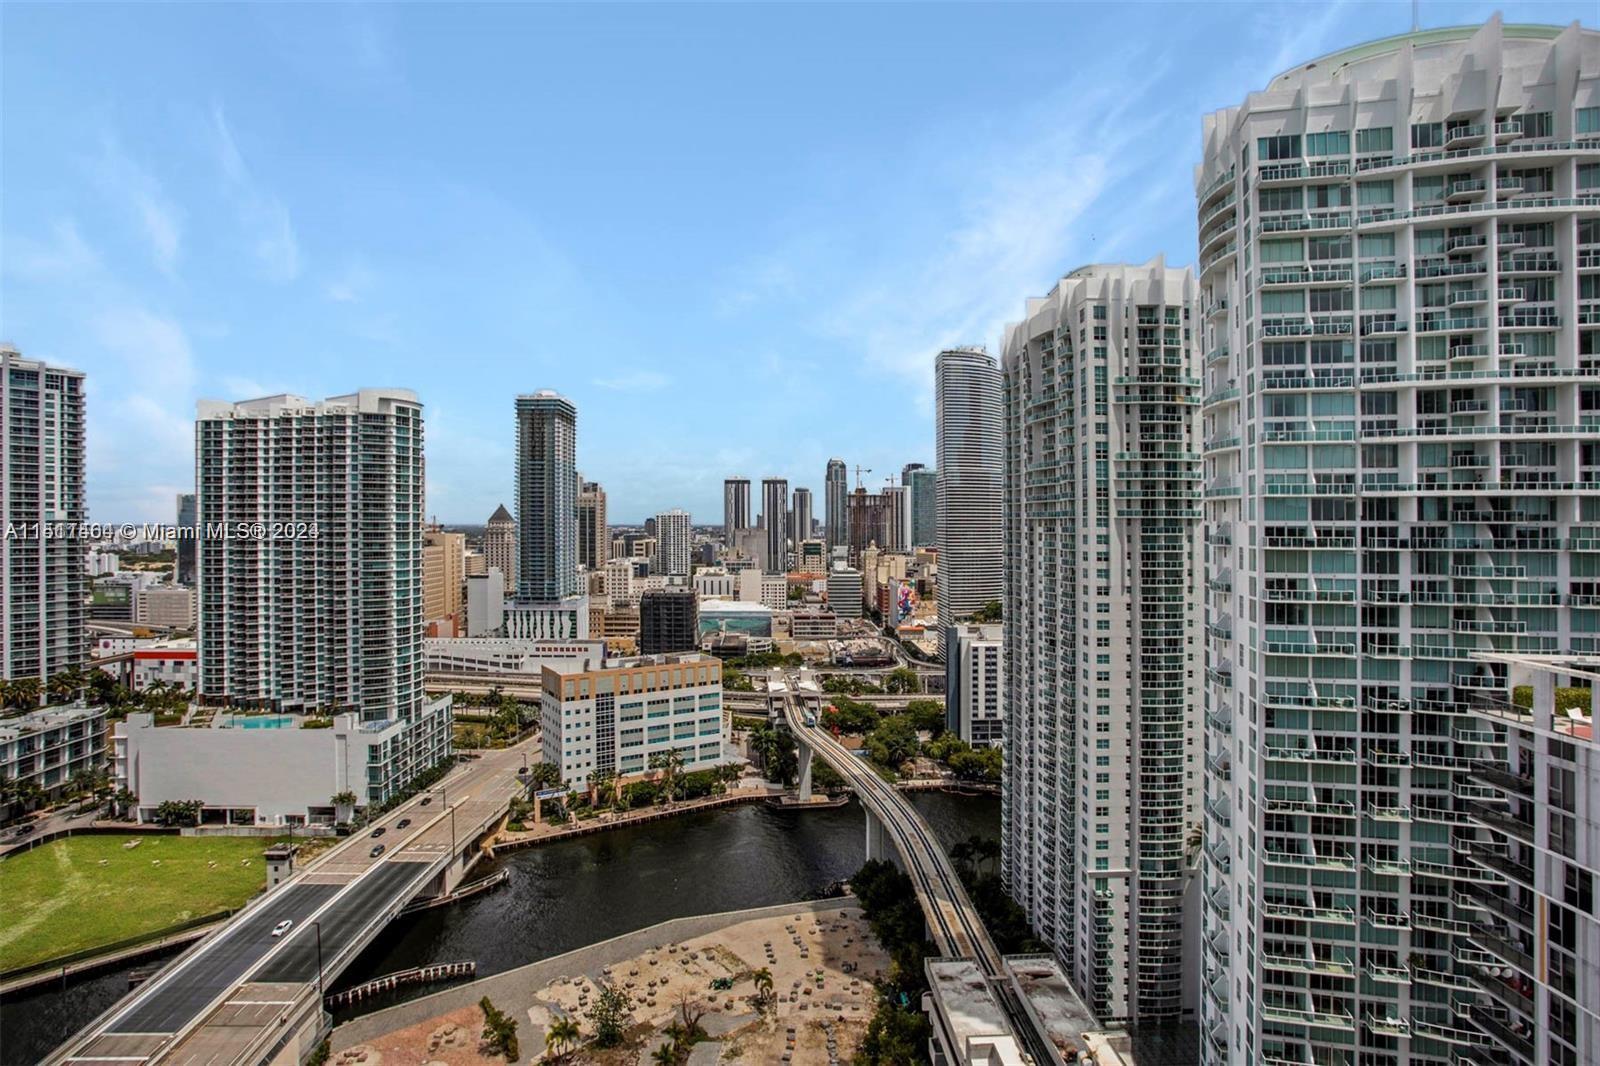 68 SE 6th St Unit 2412, Miami, Florida, 33131, United States, 2 Bedrooms Bedrooms, ,3 BathroomsBathrooms,Residential,For Sale,68 SE 6th St Unit 2412,1445855